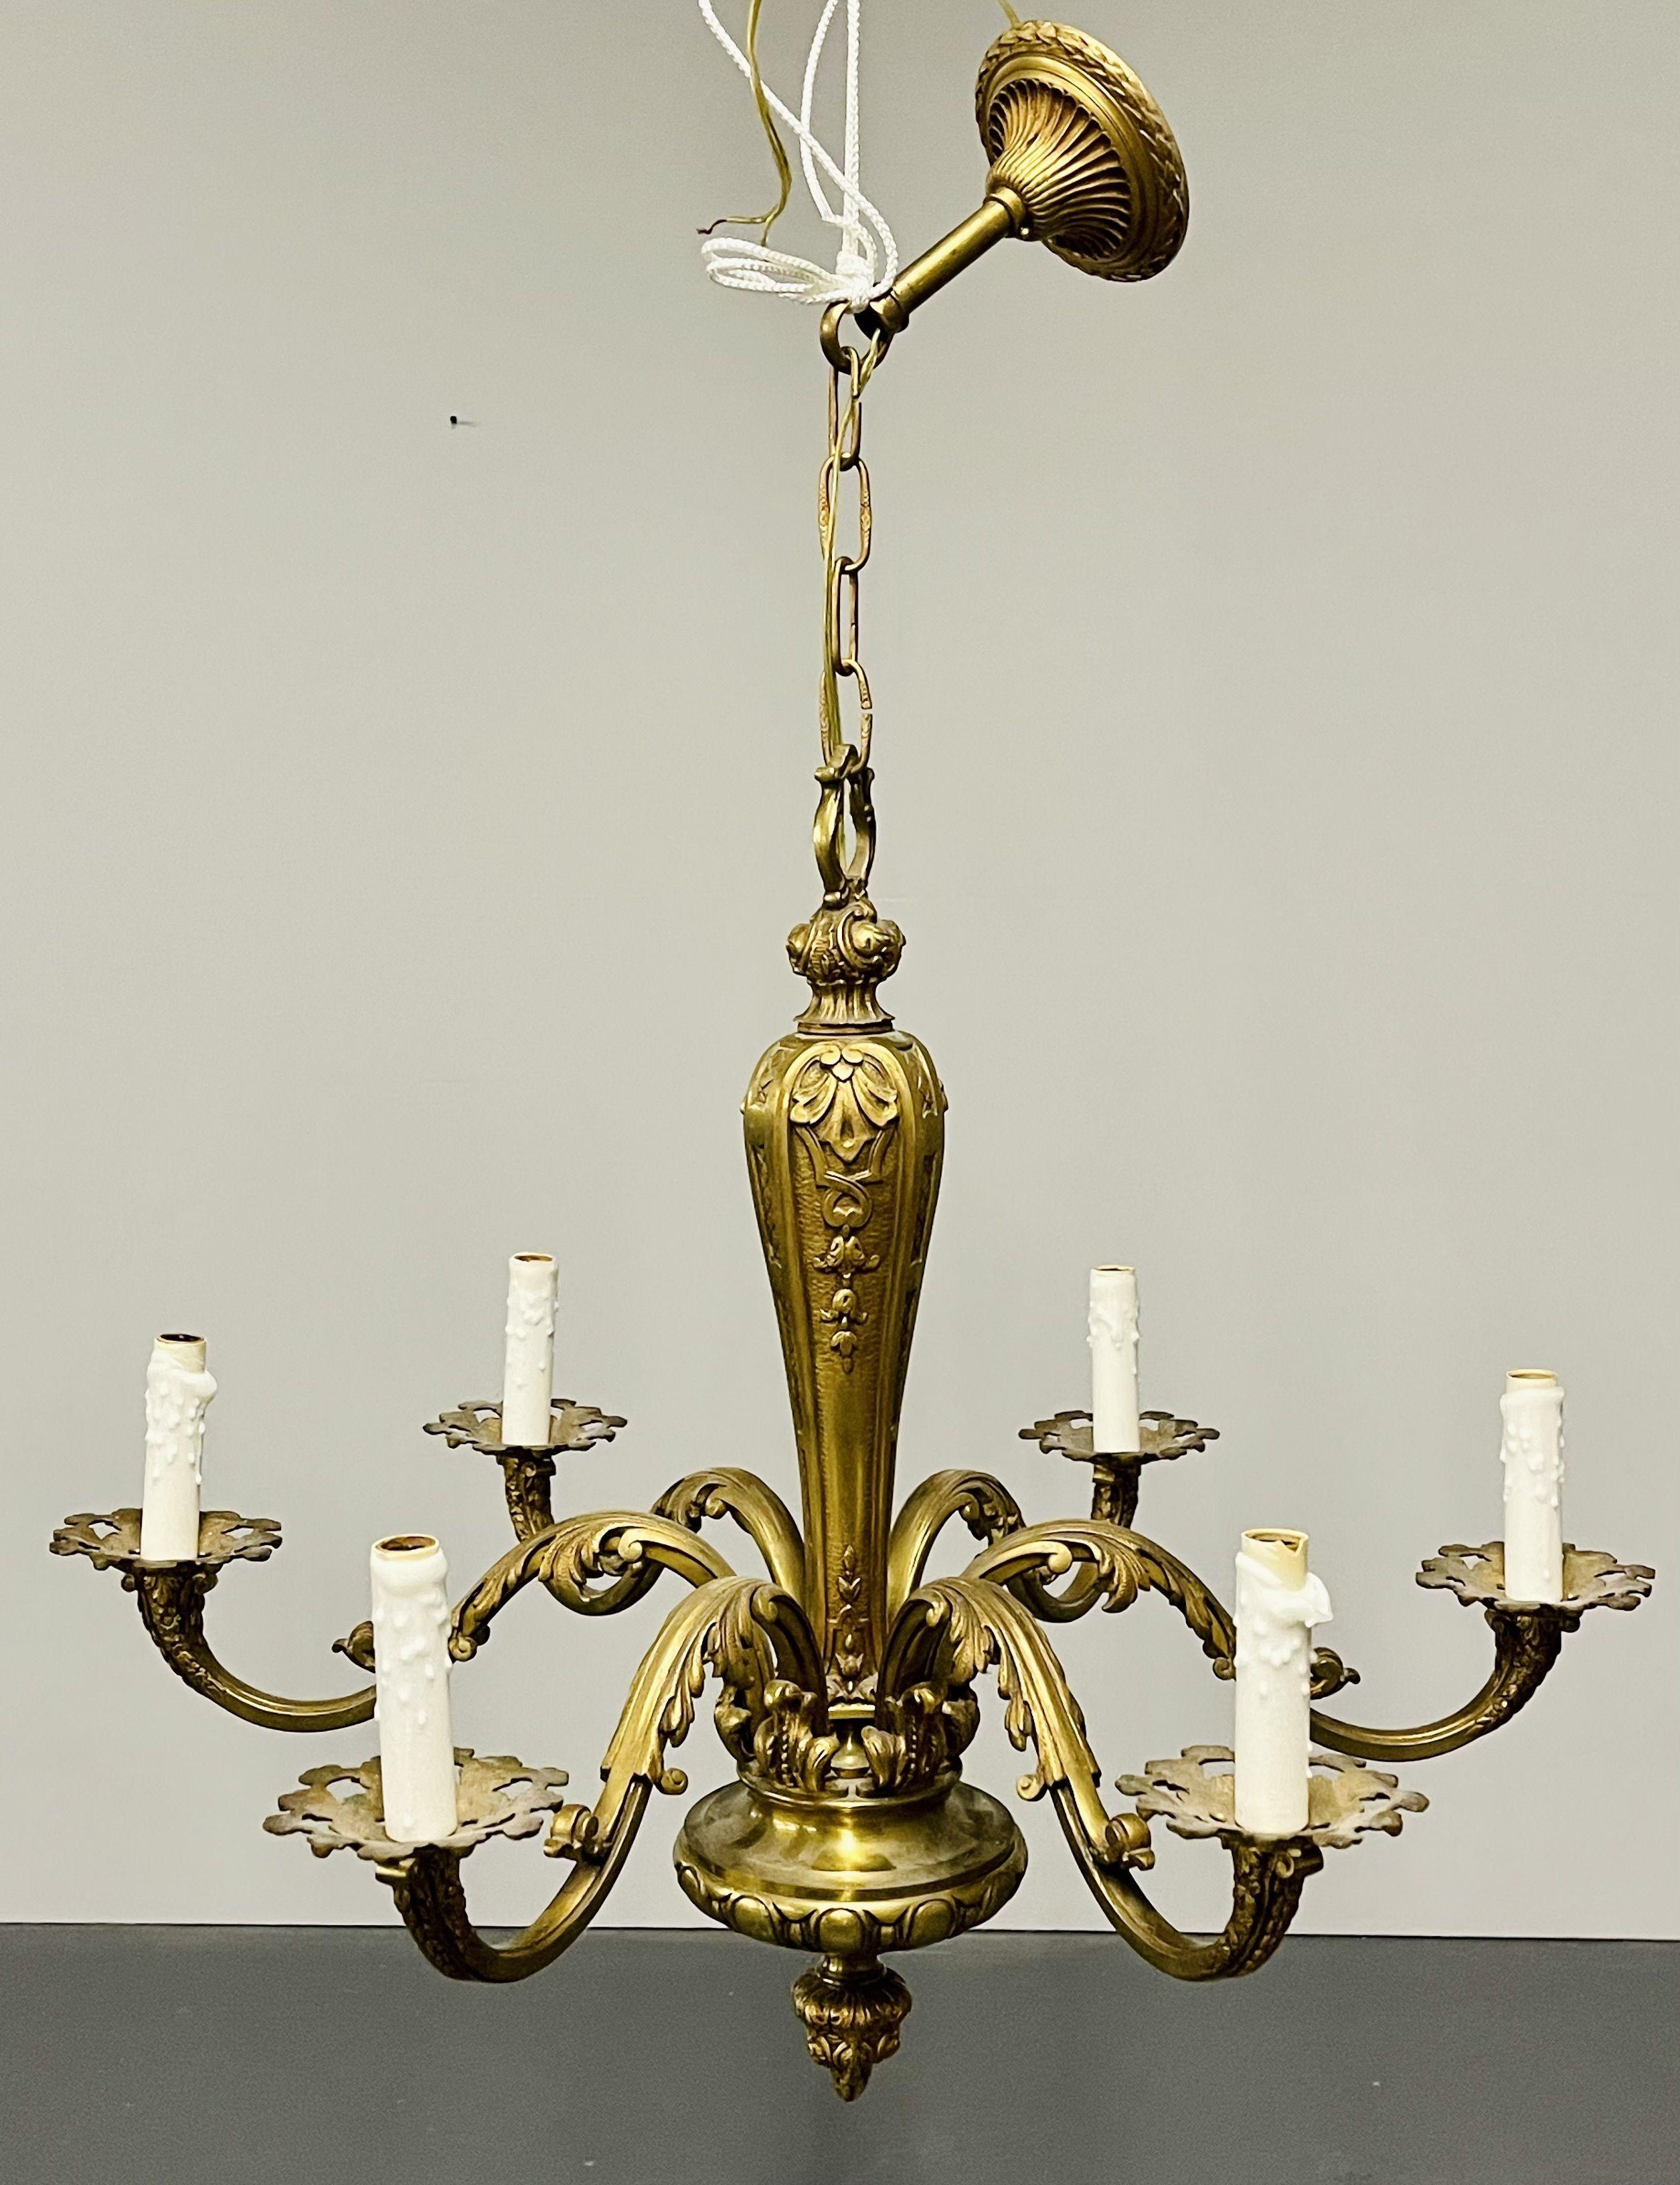 French solid bronze six light chandelier, Canopy, chain. This finely cast solid bronze chandelier was newly wired approx ten years ago and is in fine working condition. This recently acquired estate item is certain to add charm to any setting in the